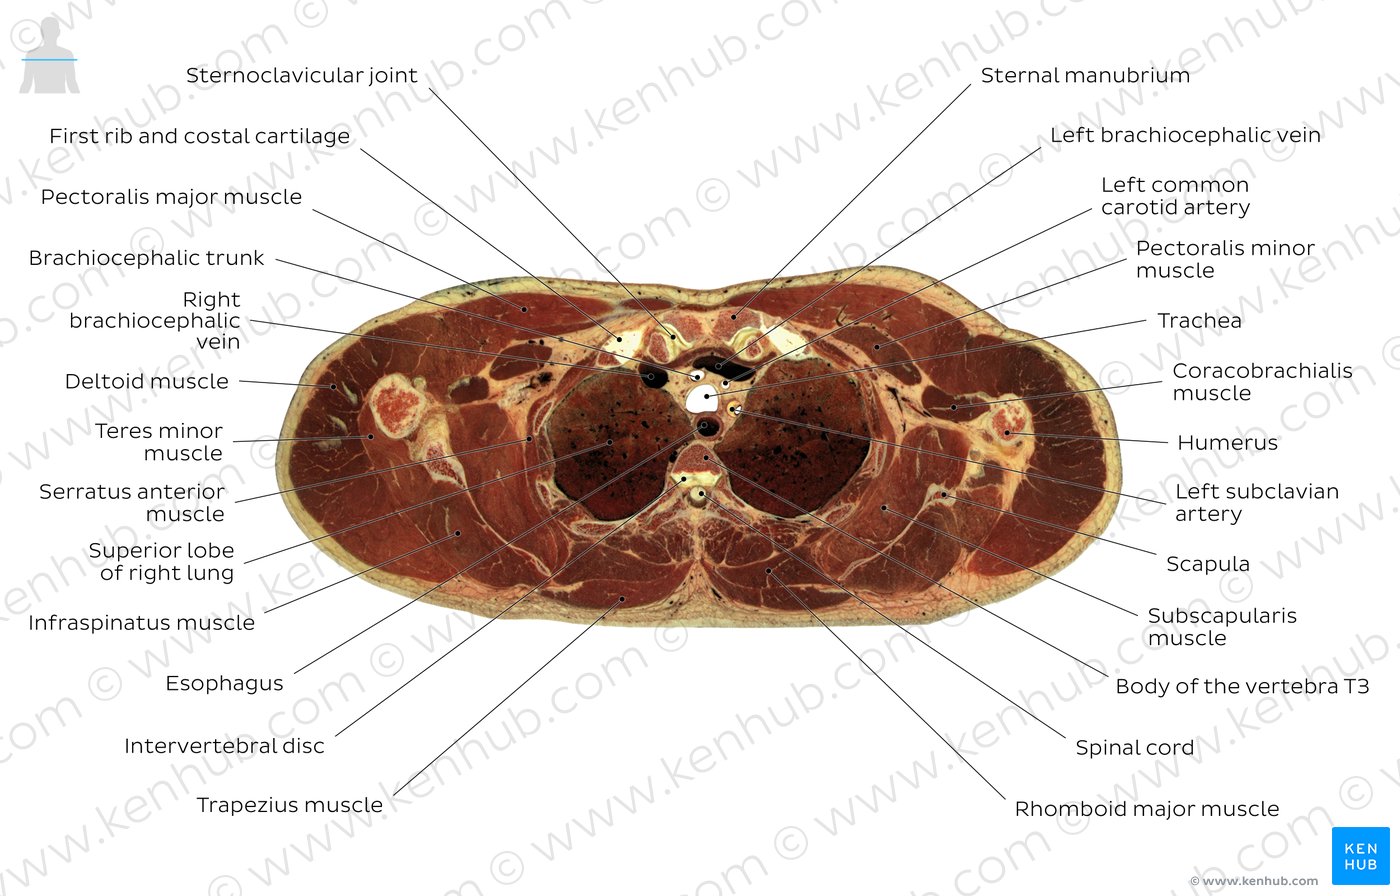 Cross section of the thorax through T3: Diagram